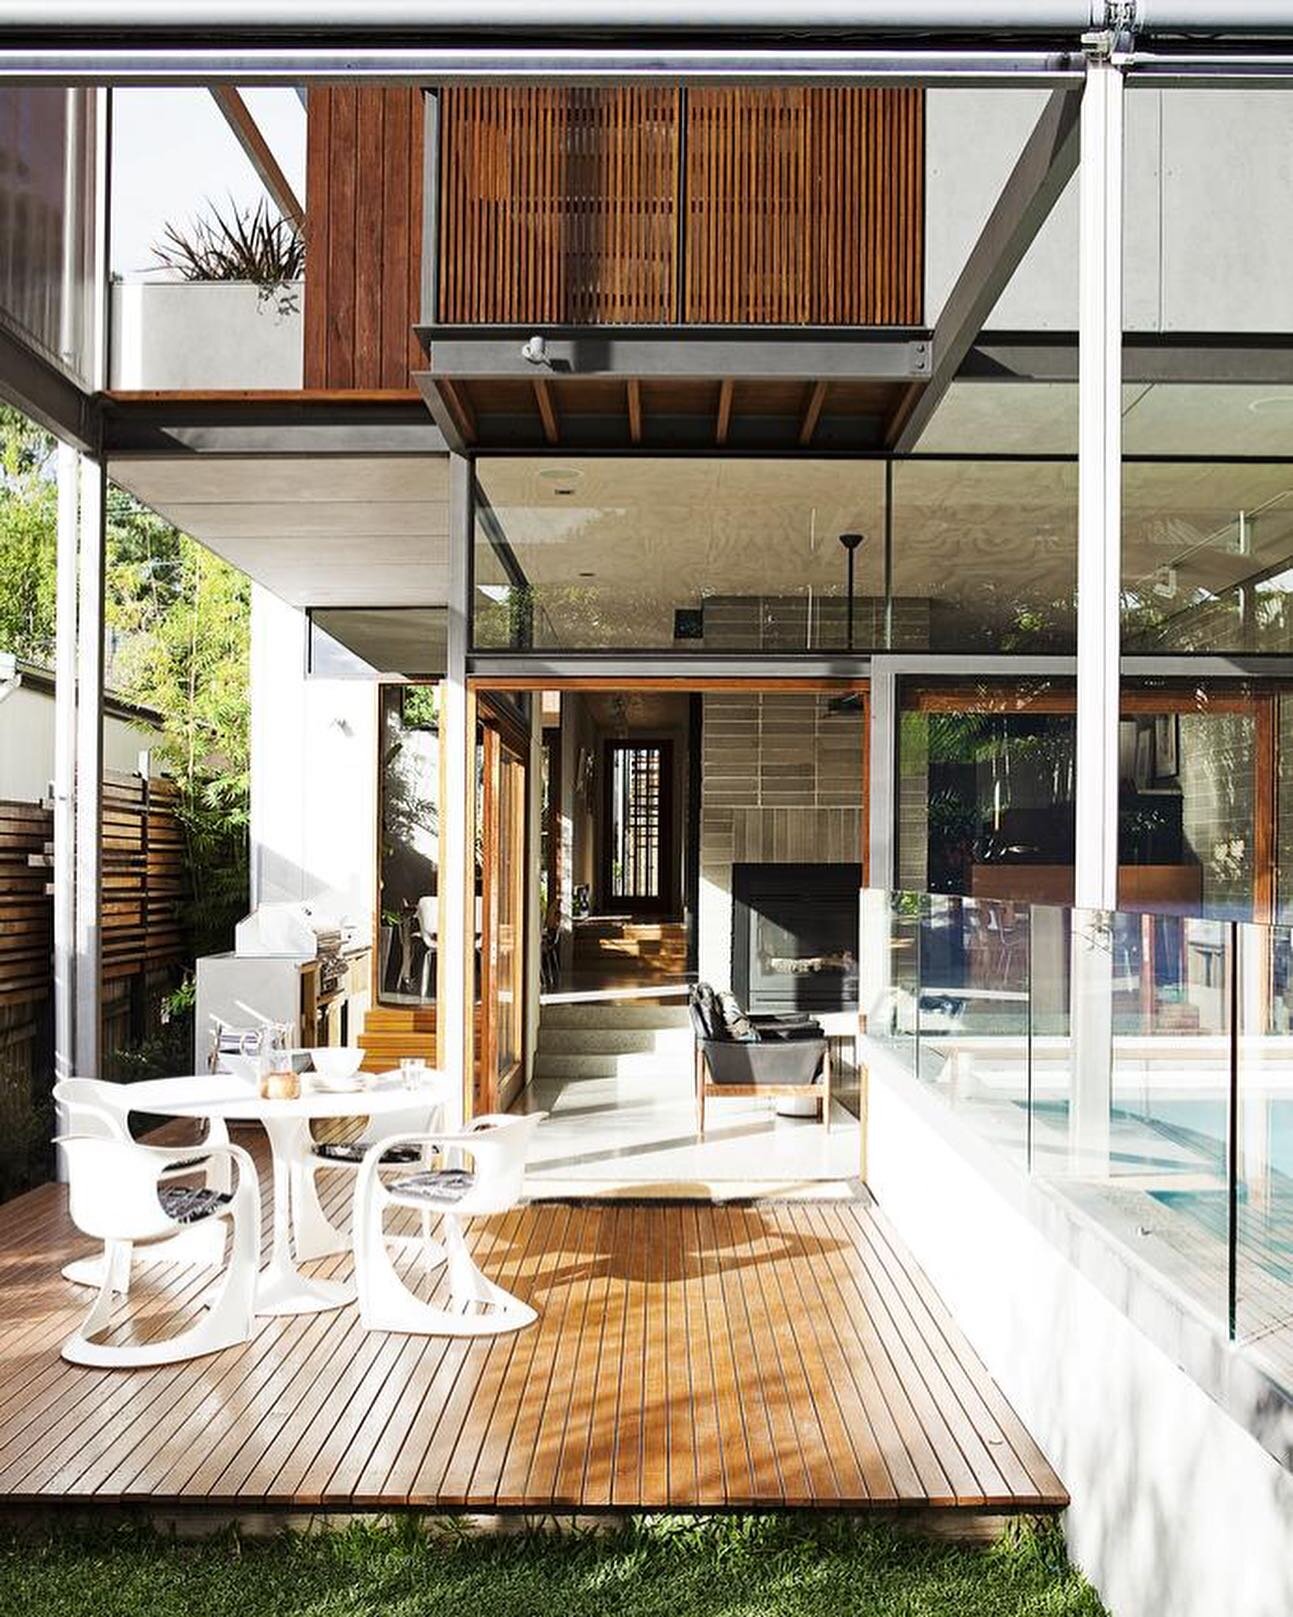 Throwback to 2012 and our old house in Manly was featured in @reallivingmag Lovely photos by Photographer: Chris Warne